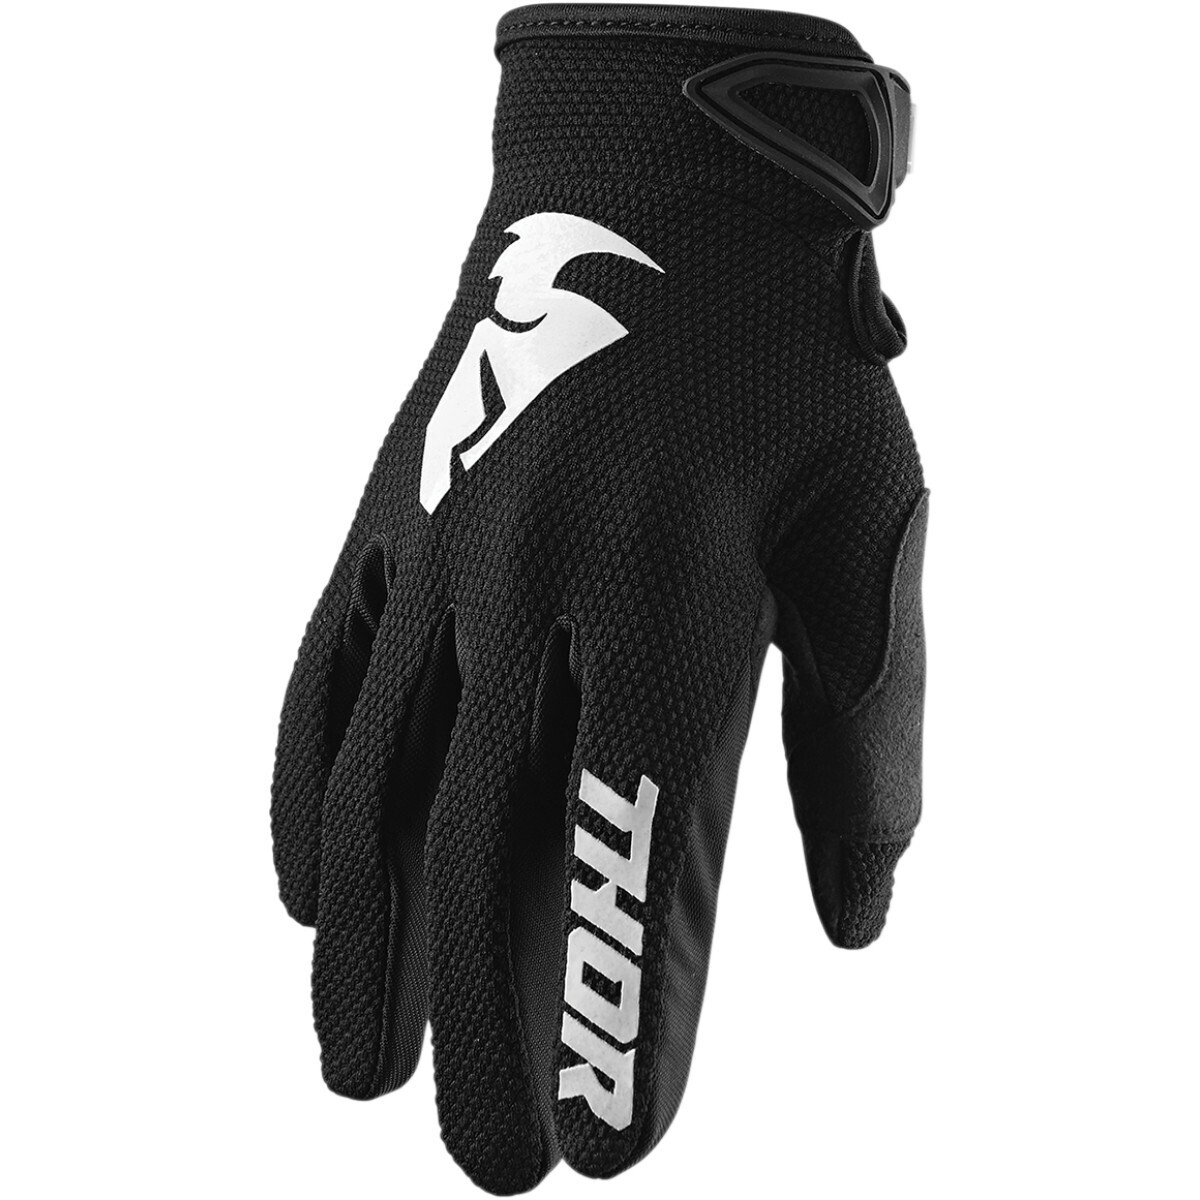 THOR
GLOVE S20 SECTOR BLK